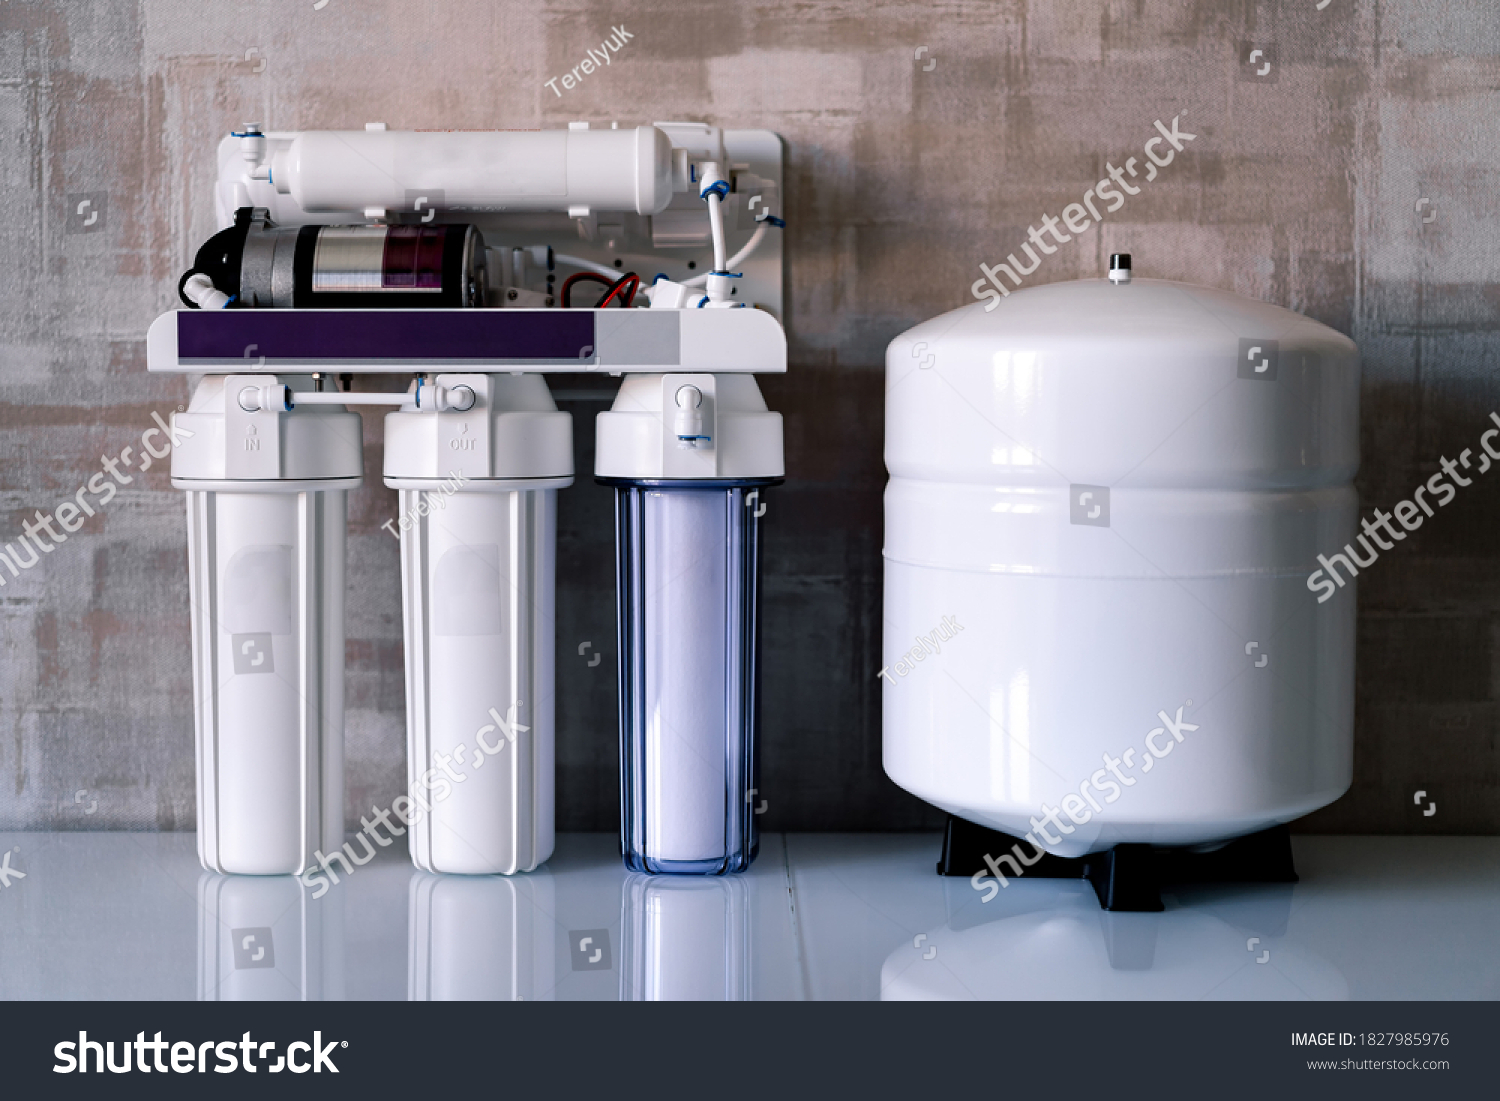 Reverse osmosis water purification system at home. Installed water purification filters. Clear water concept #1827985976